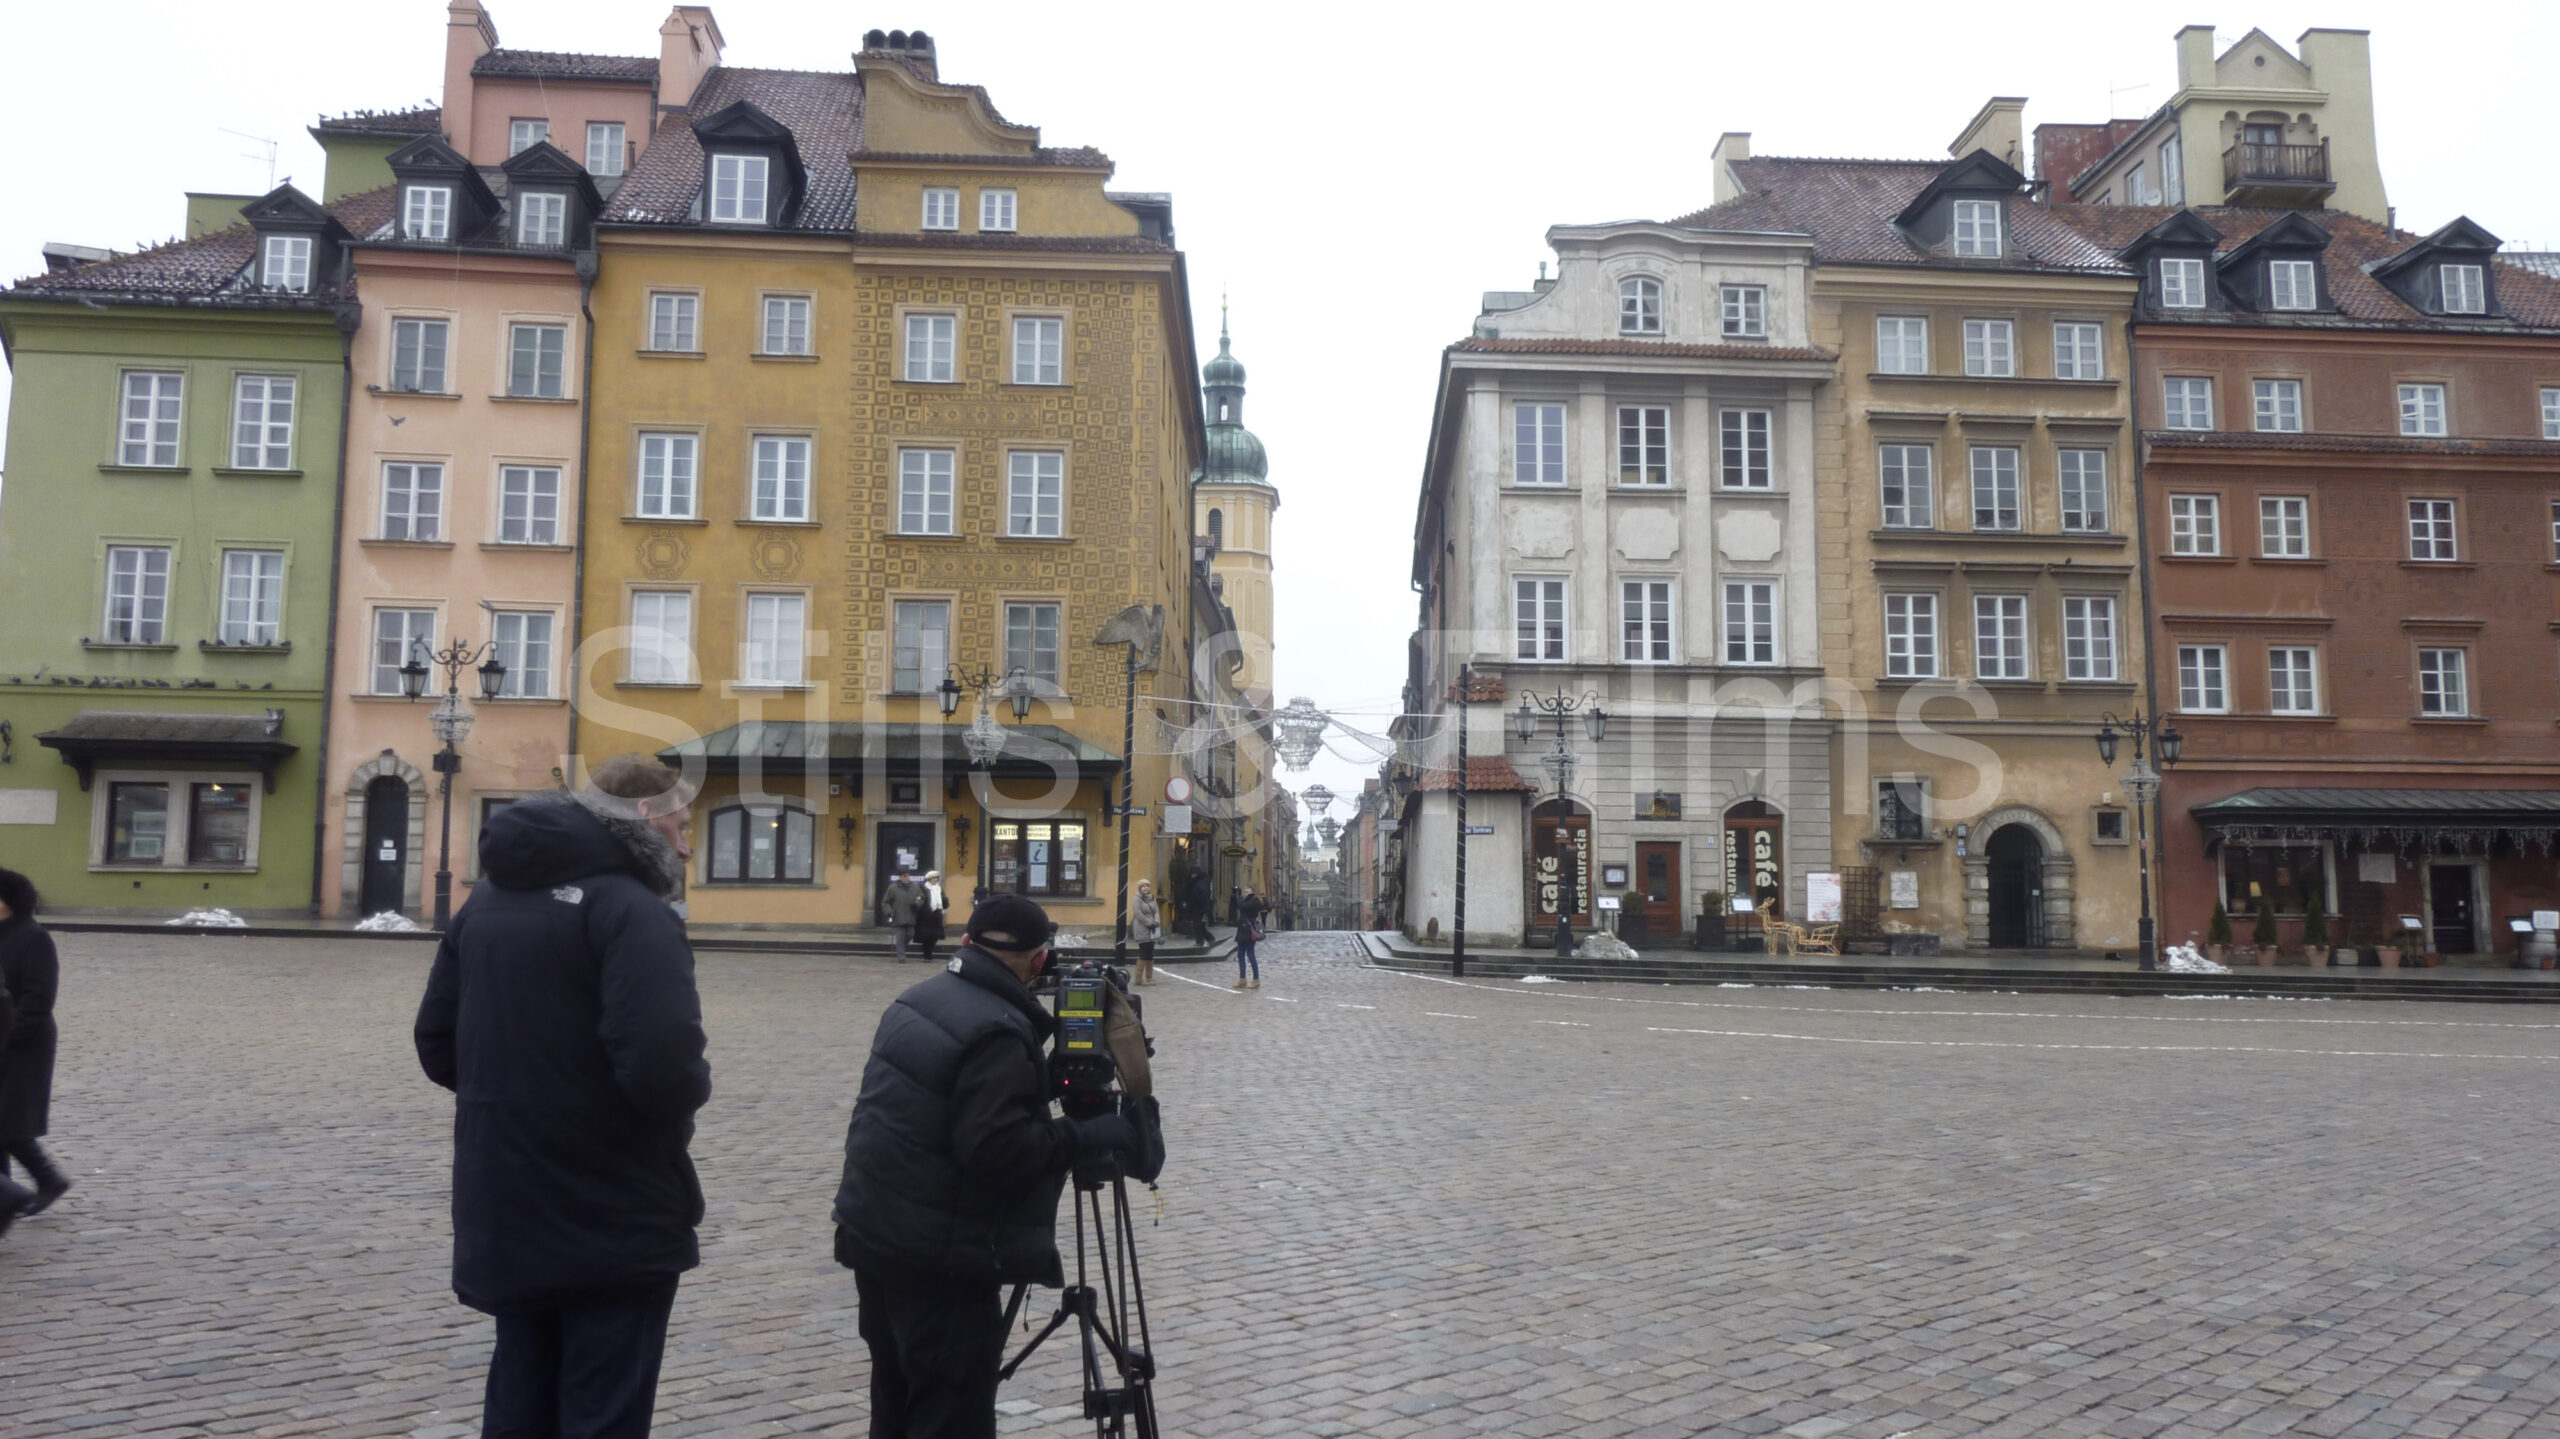 We were filming a documentary project in Warsaw for a UK production.